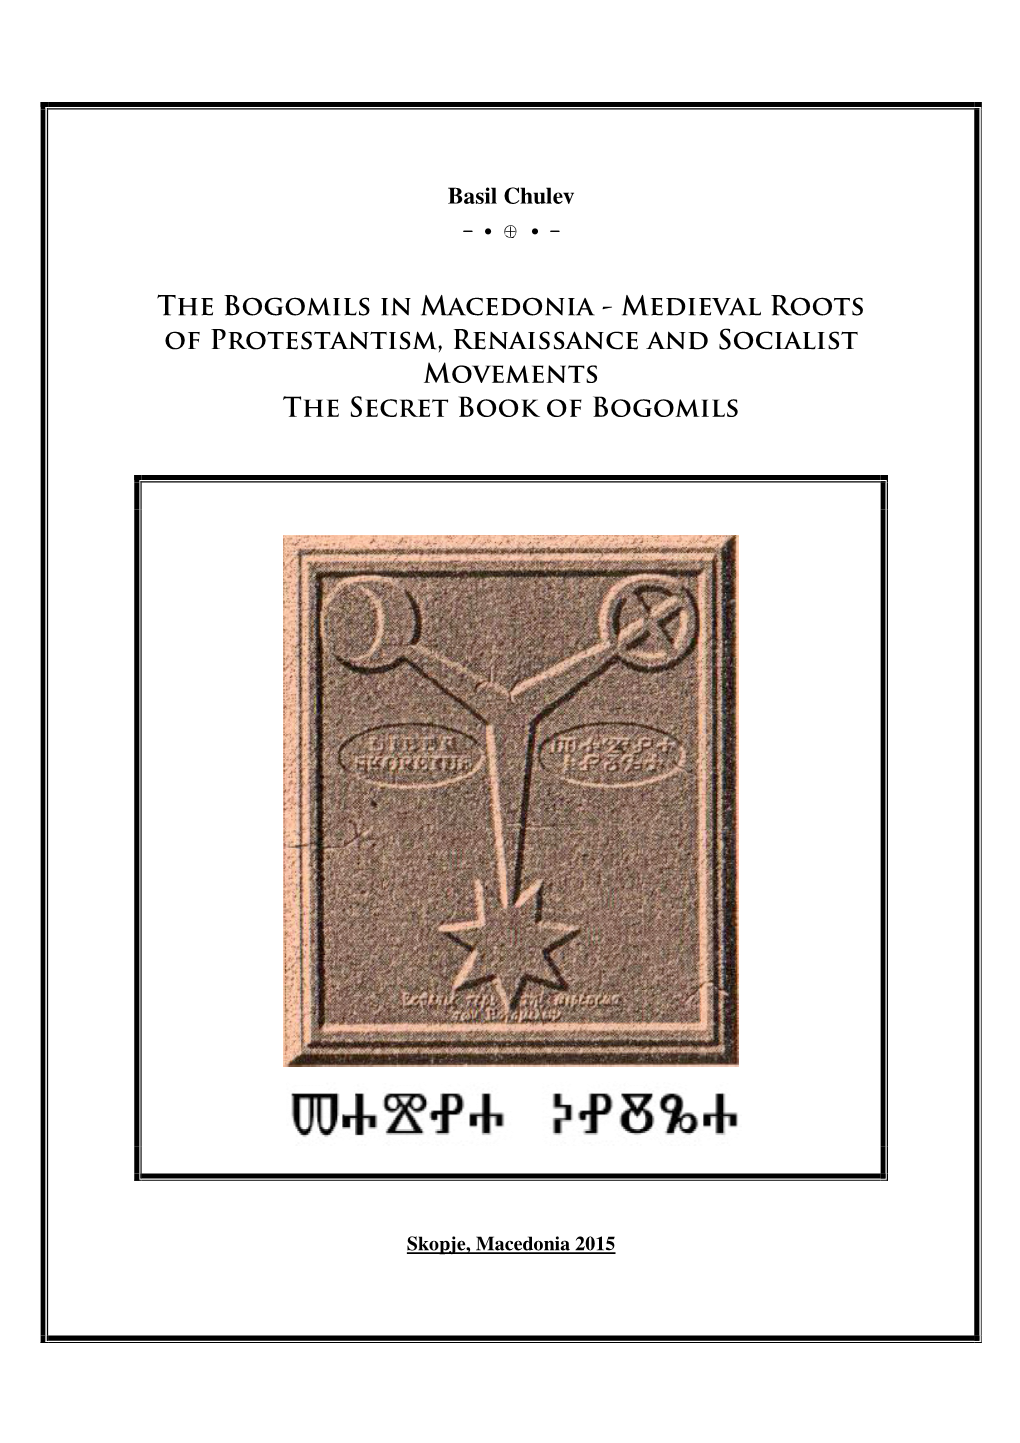 The Bogomils in Macedonia - Medieval Roots of Protestantism, Renaissance and Socialist Movements the Secret Book of Bogomils